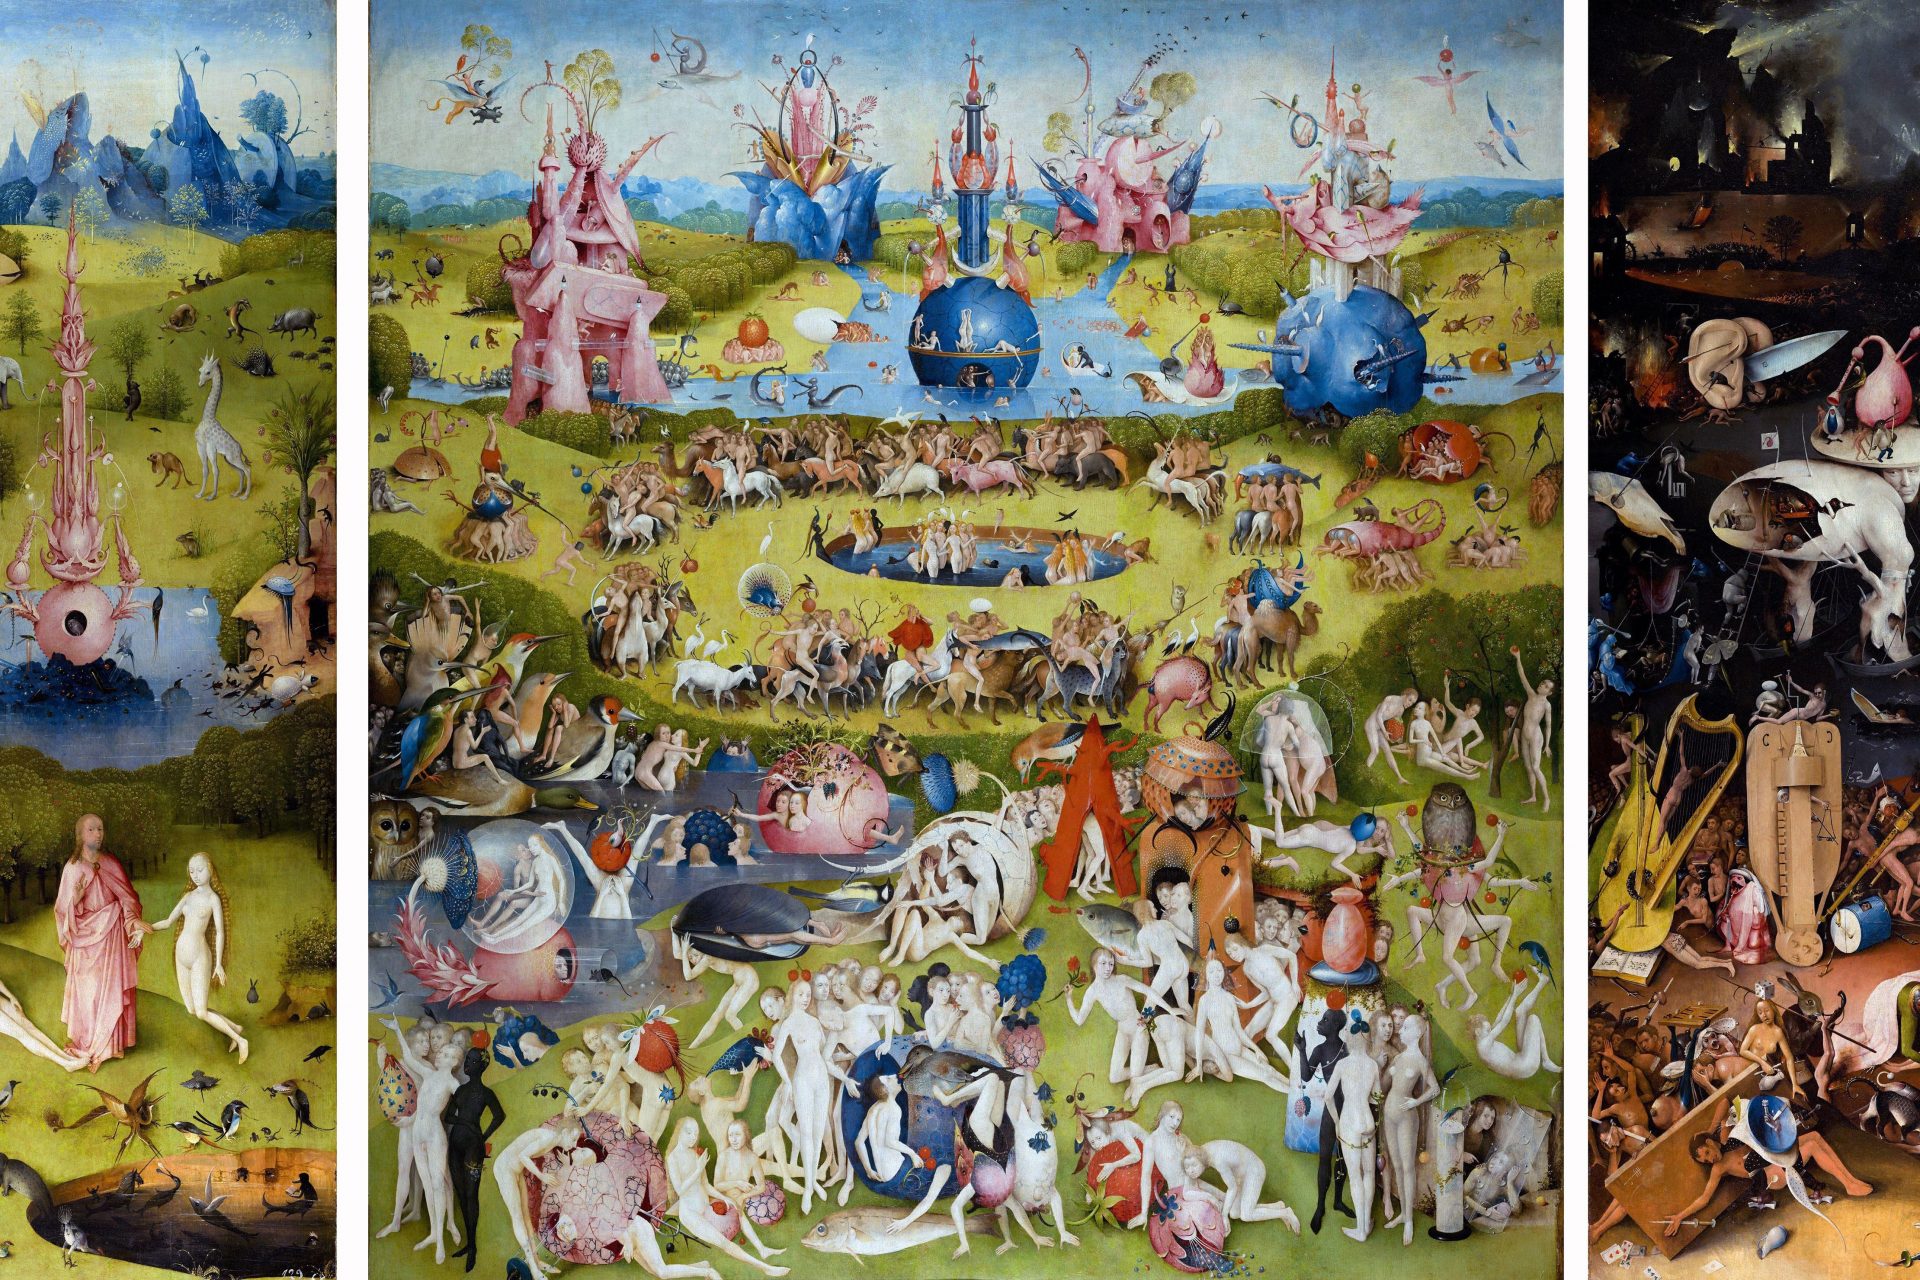 ‘The Garden of Earthly Delights’ by Hieronymus Bosch